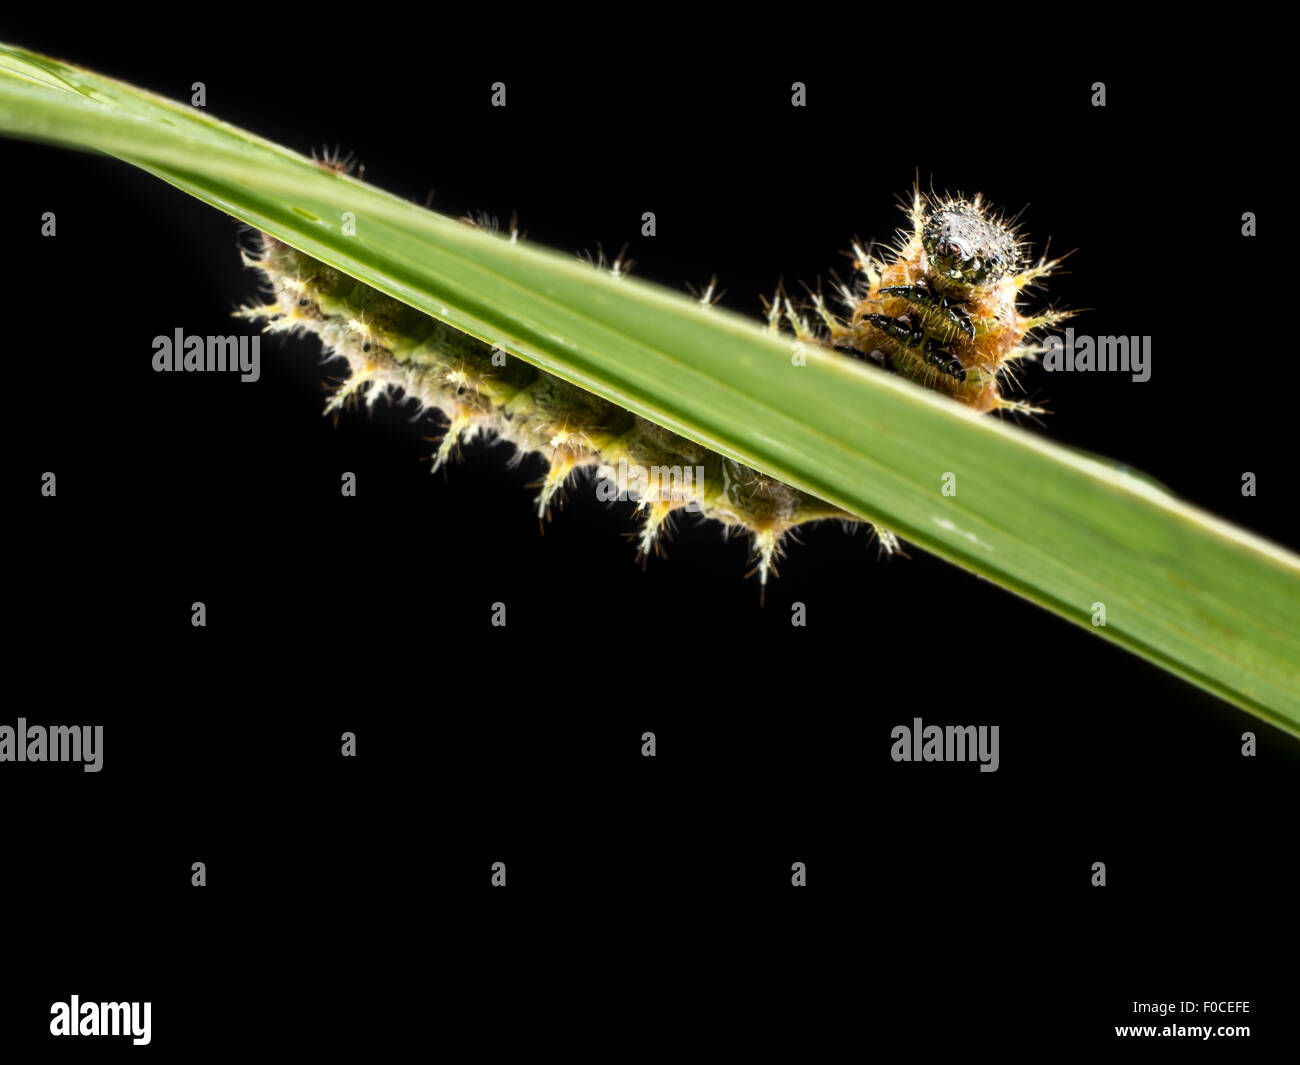 Caterpillar poking out of green leaf on black background Stock Photo